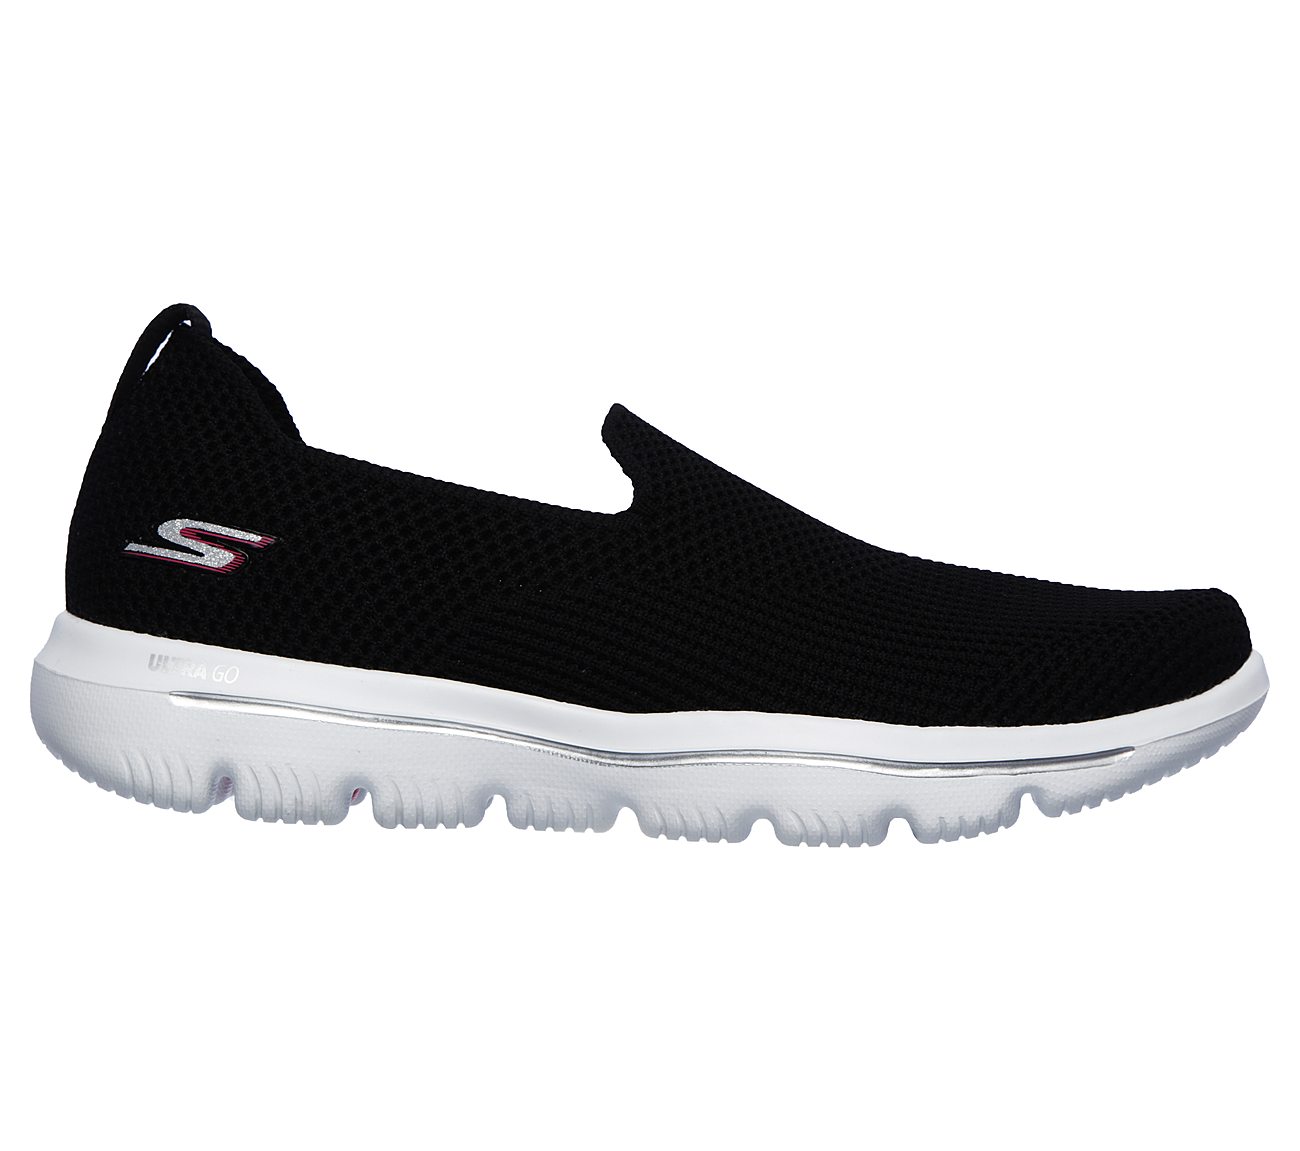 GO WALK EVOLUTION ULTRA-ENDLE, BLACK/WHITE Footwear Right View